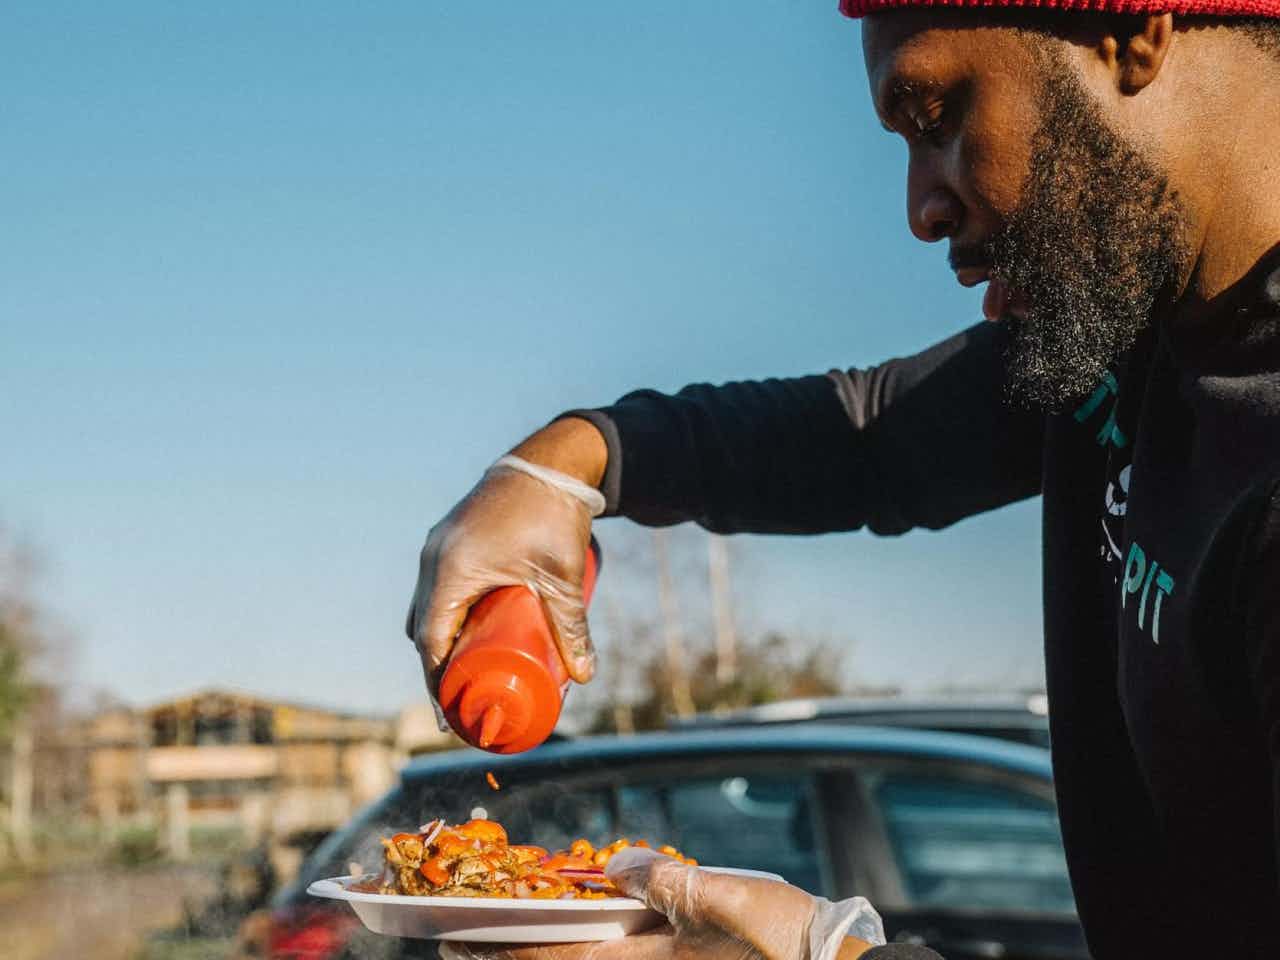 Chef from Suya Pit adds sauce to a street food dish